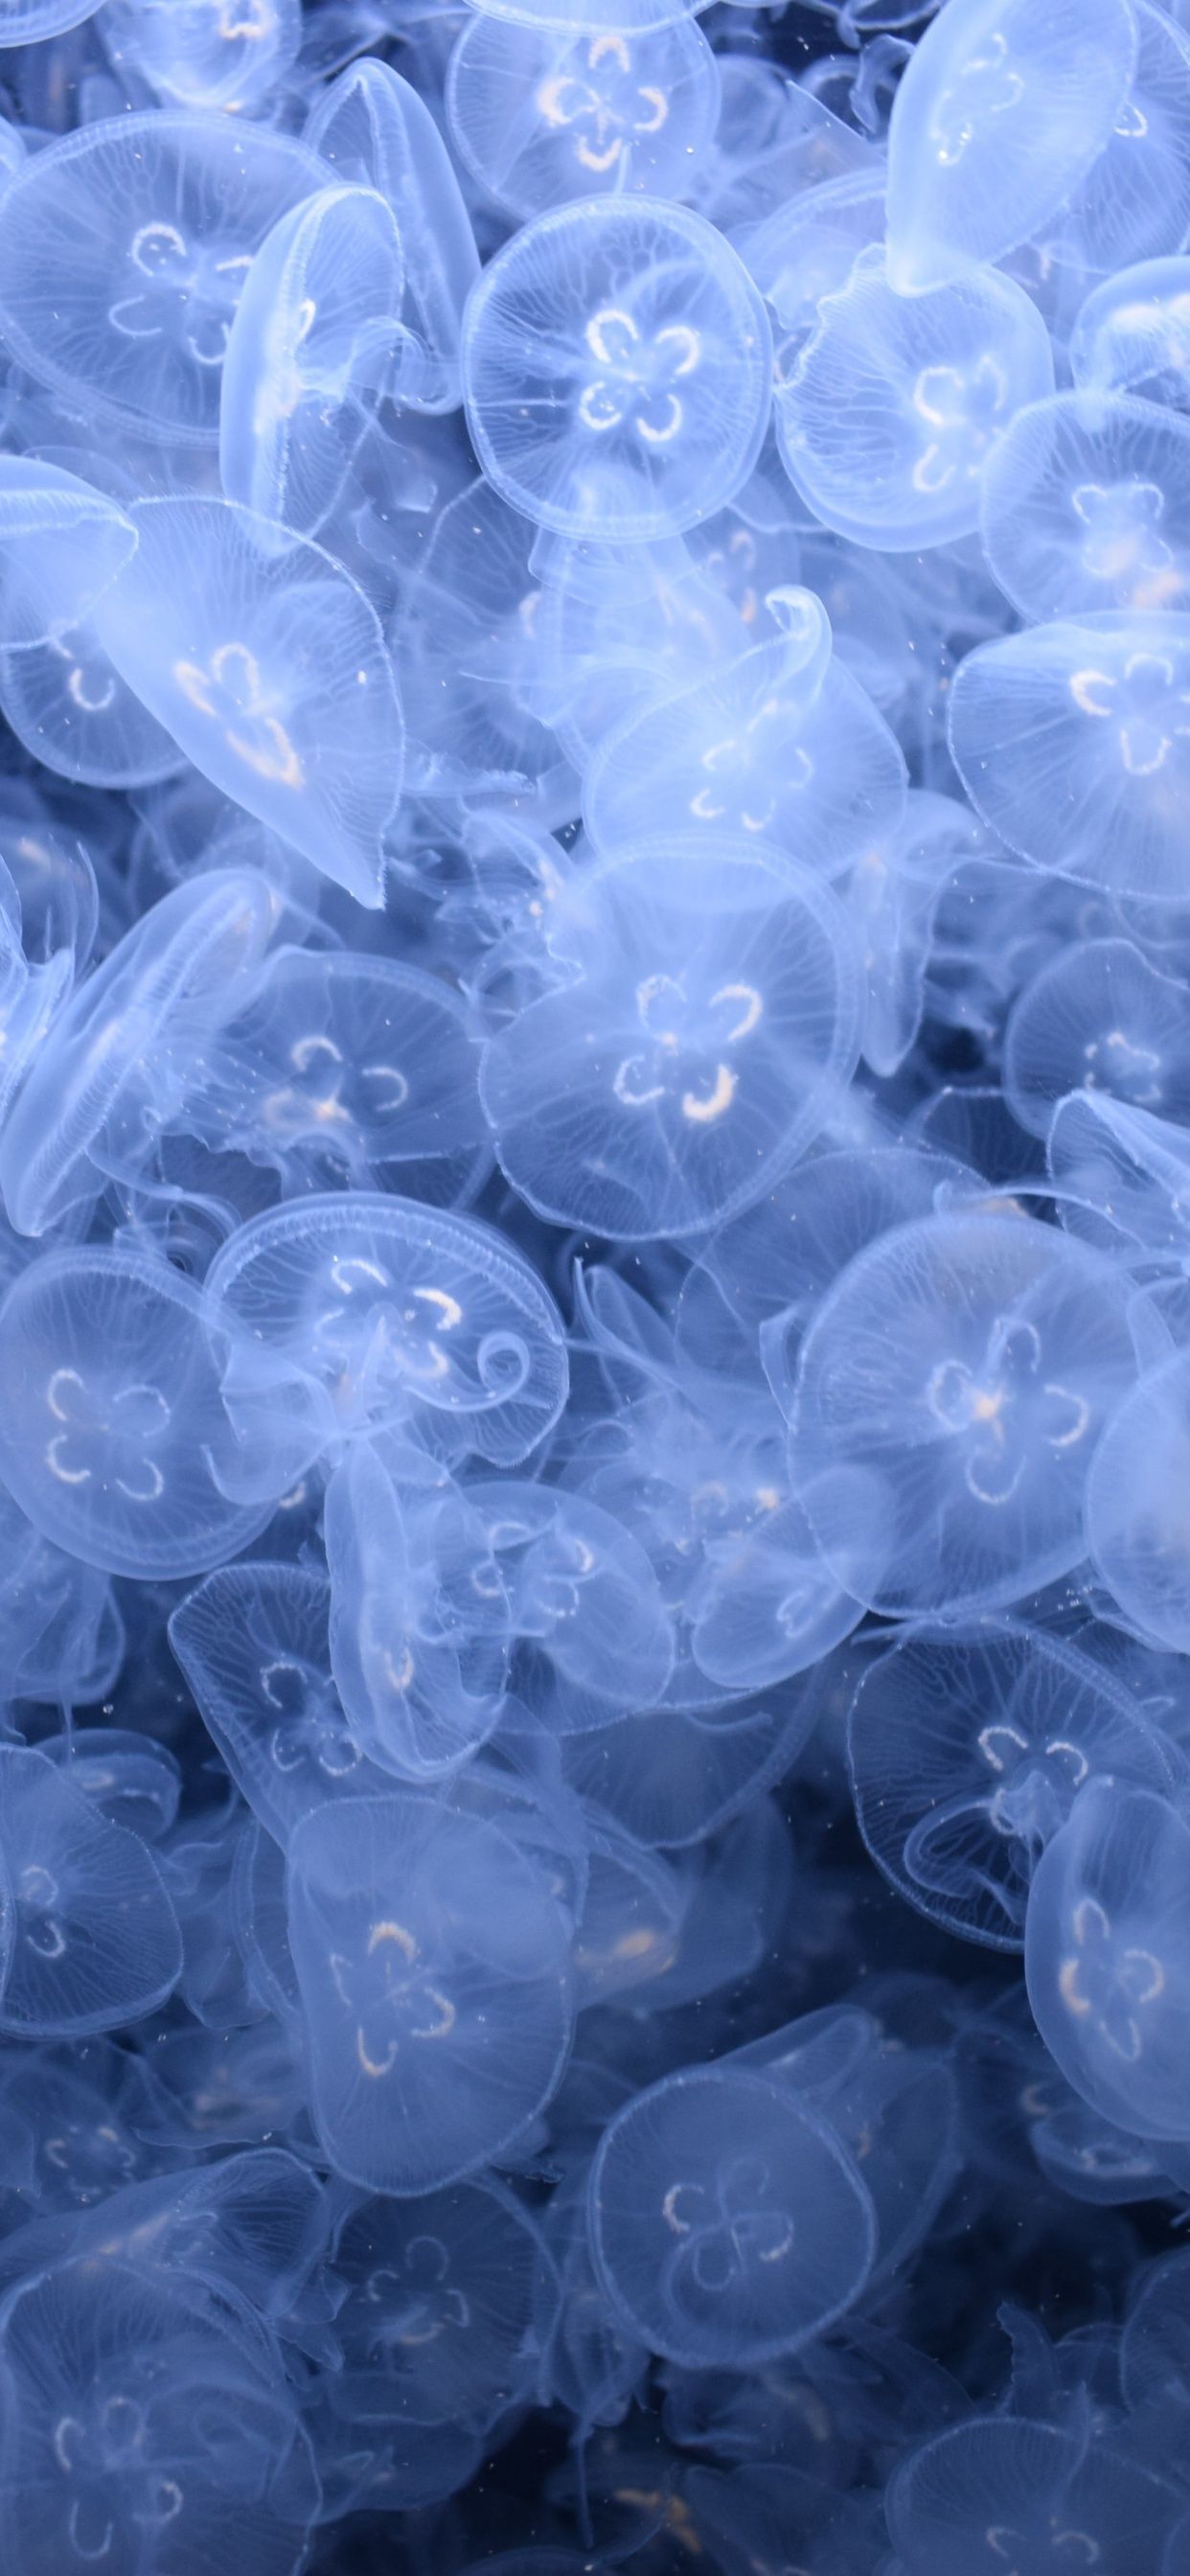 A large group of jellyfish floating in water - Underwater, jellyfish, ocean